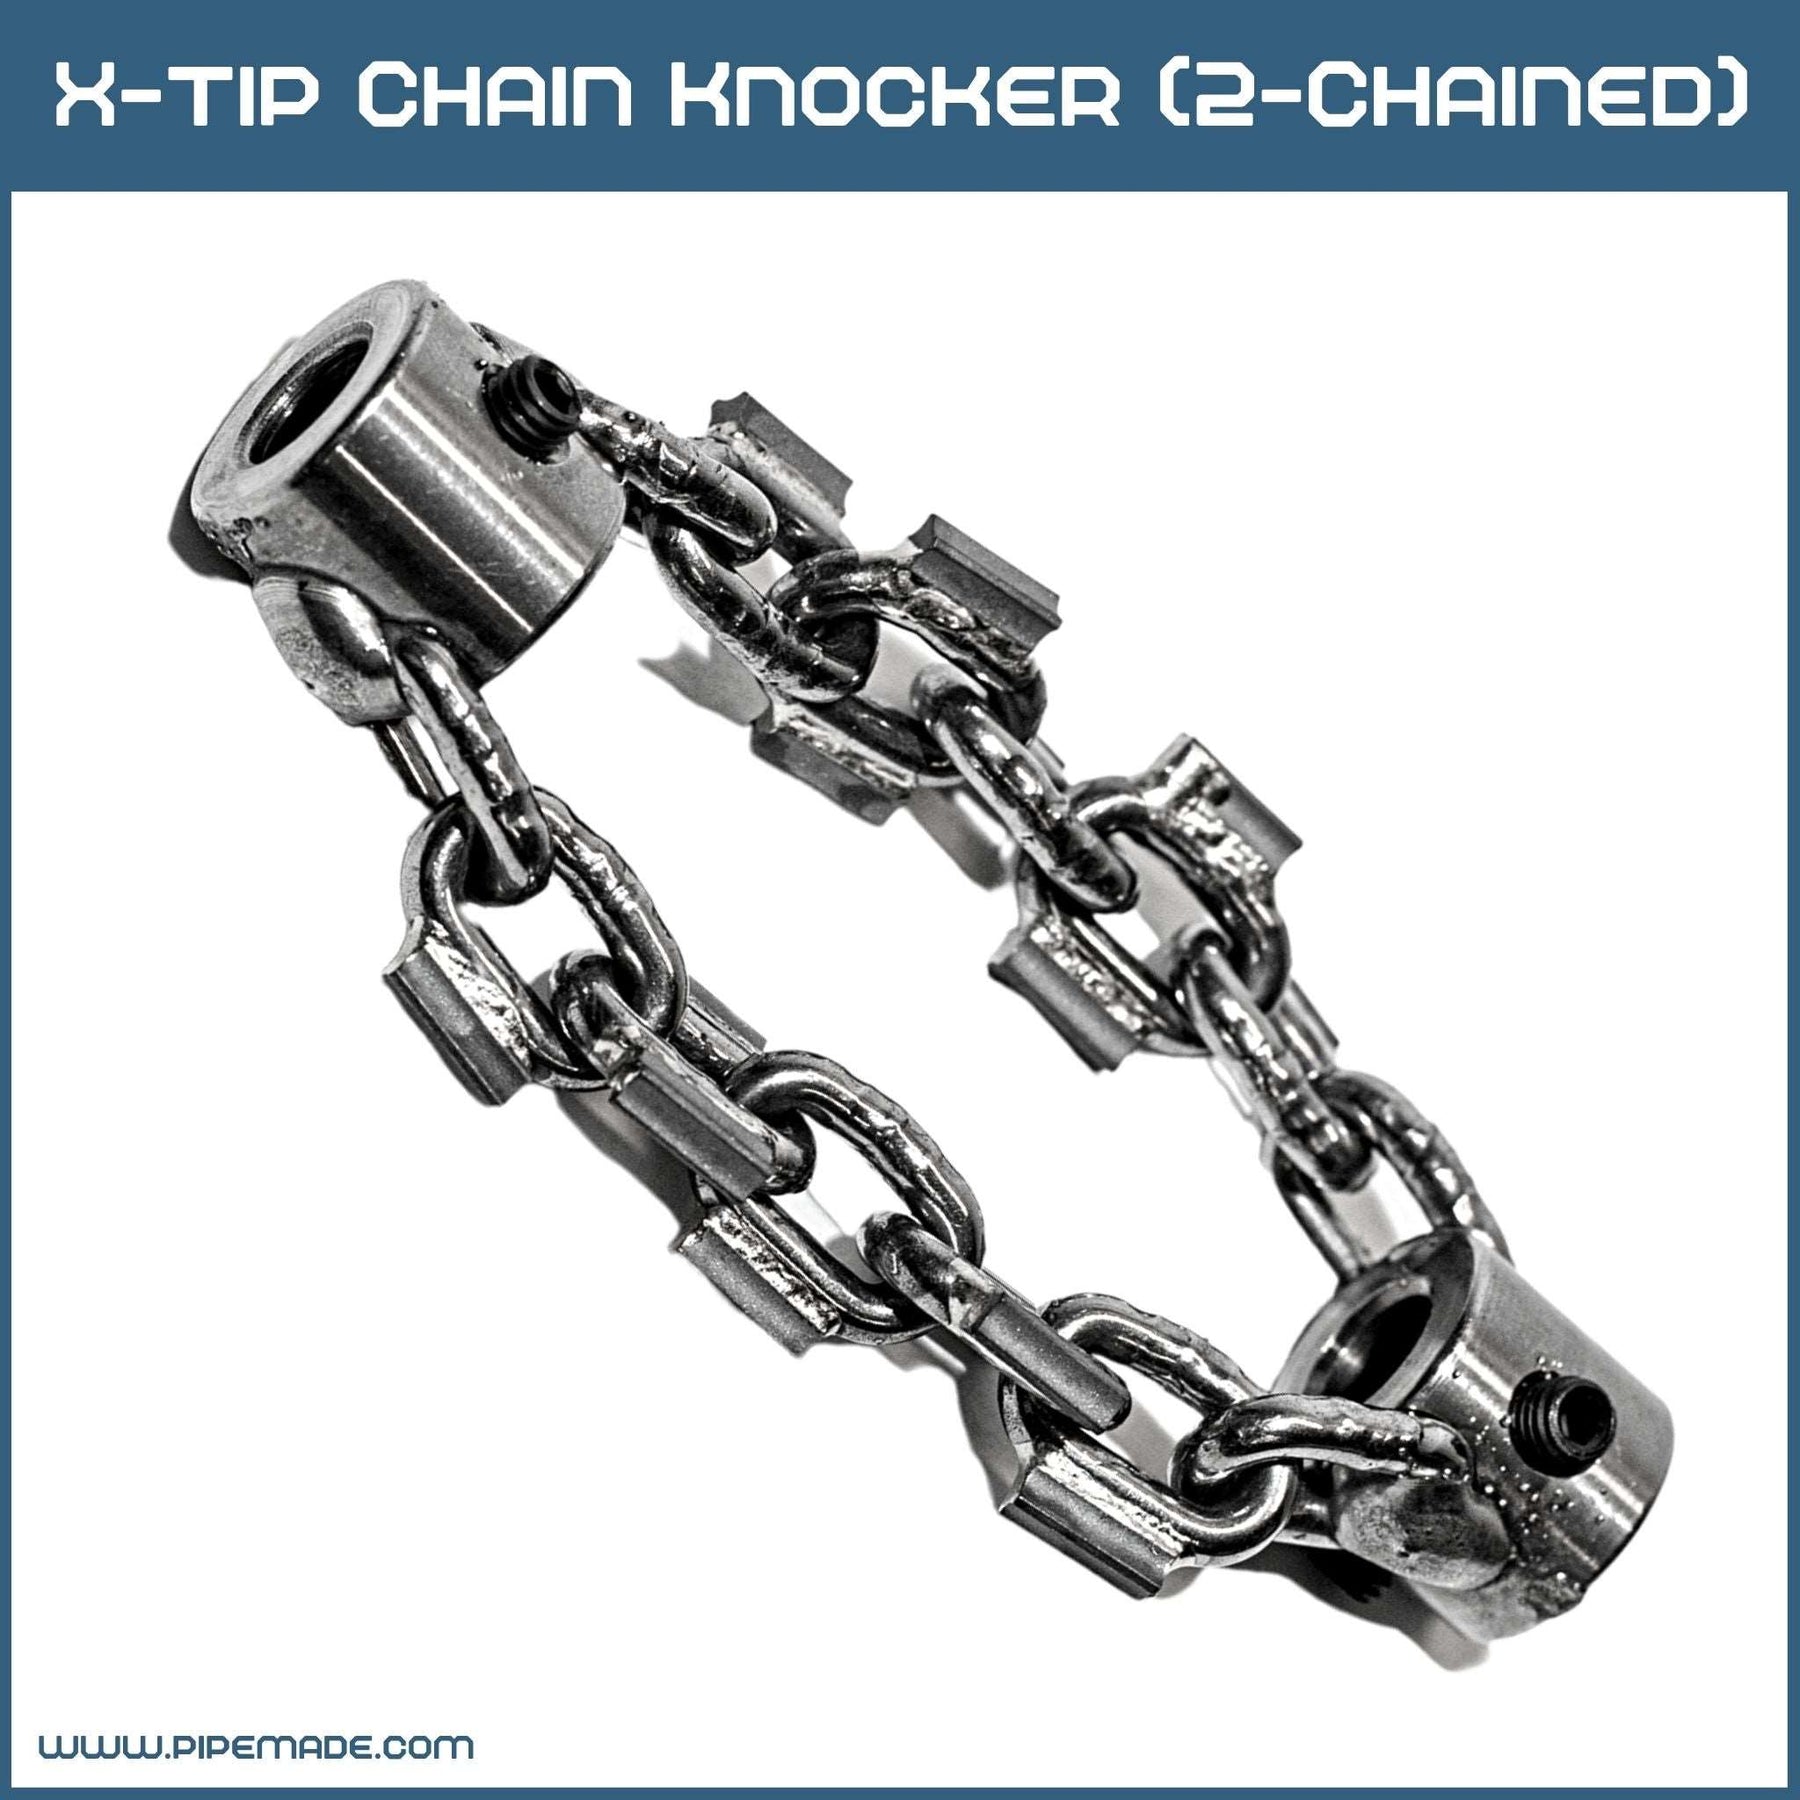 X-Tip Chain Knocker (2-Chained) | X-tip Chain Knockers. Cleaning Chains | Zewer | zewer-x-tip-chain-knocker-2-chained